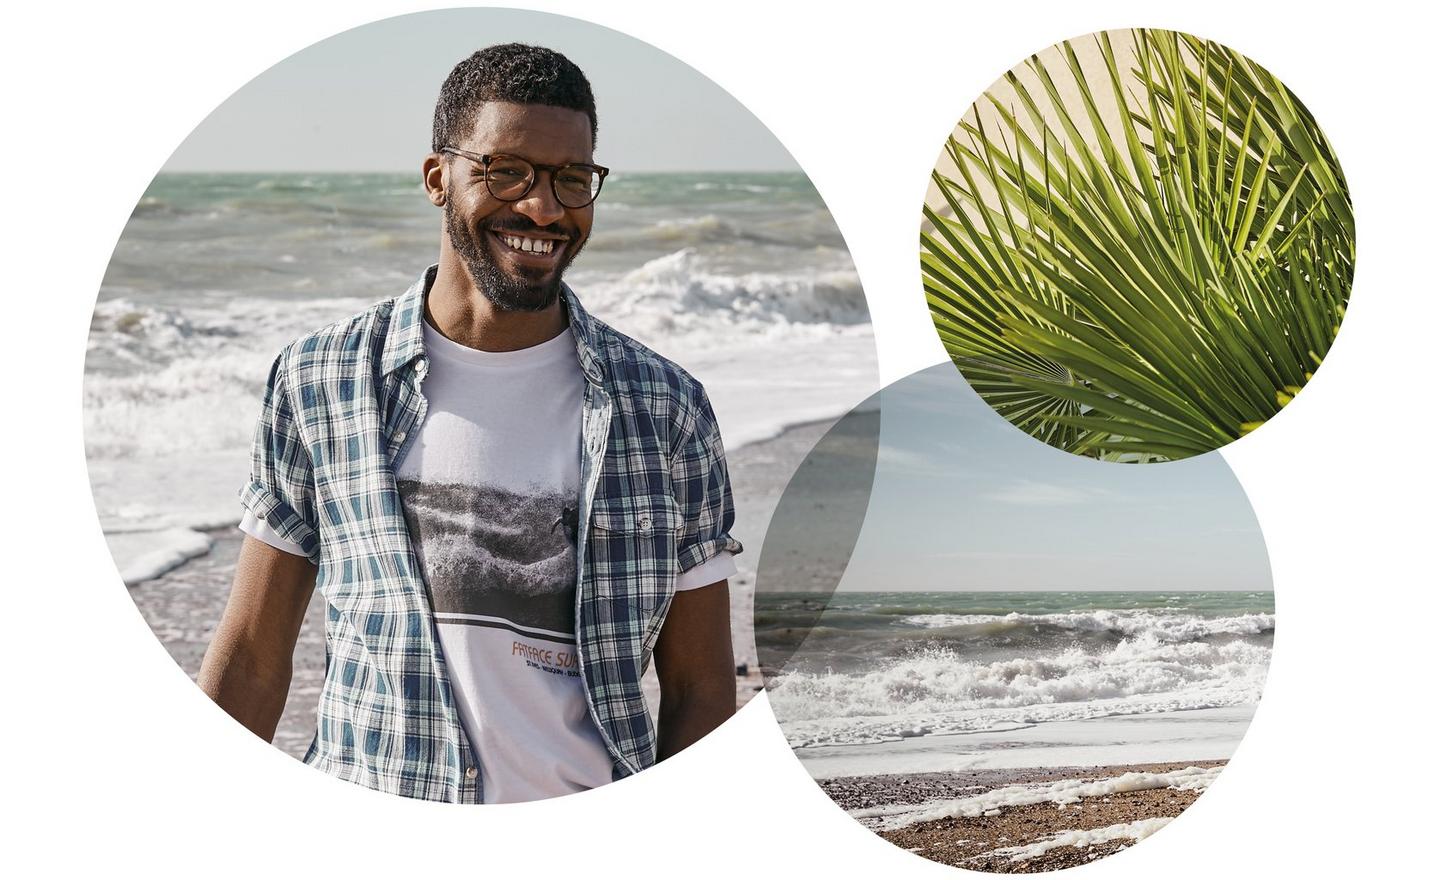 A man in a check shirt & graphic t-shirt, smiling by the sea. Spiky palm leaves. Waves crashing on a beach.